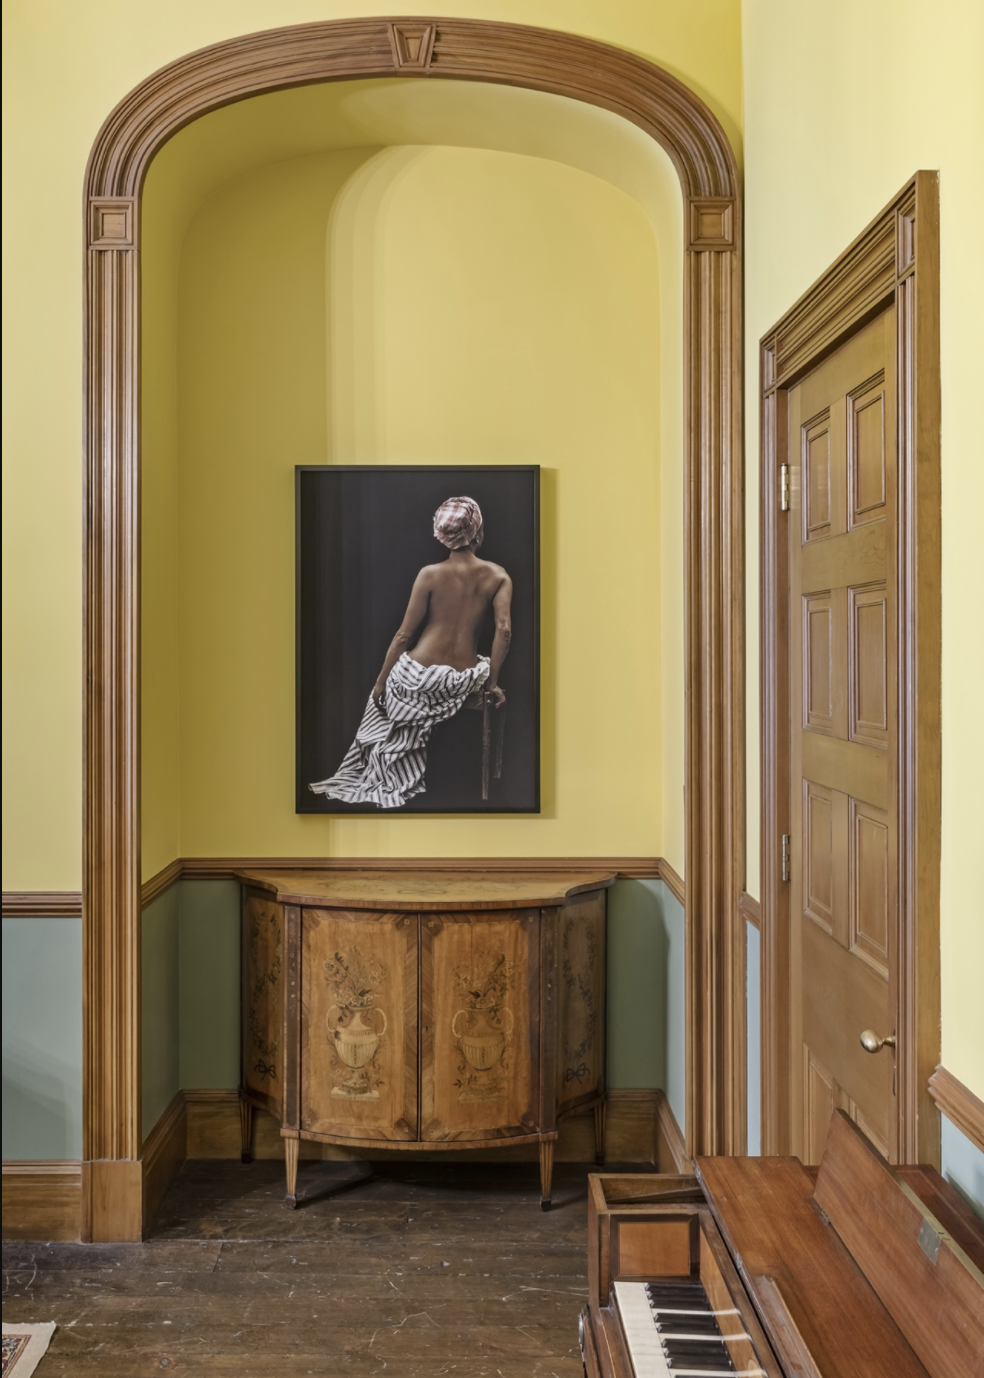 3. Ayana V. Jackson, Installation view of Fissure, Campbell House Museum, Toronto, May 1 - June 2, 2019. Photo_ Toni Hafkenscheid. Courtesy CONTACT, the artist, and Galerie Baudoin Lebon.jpg.png